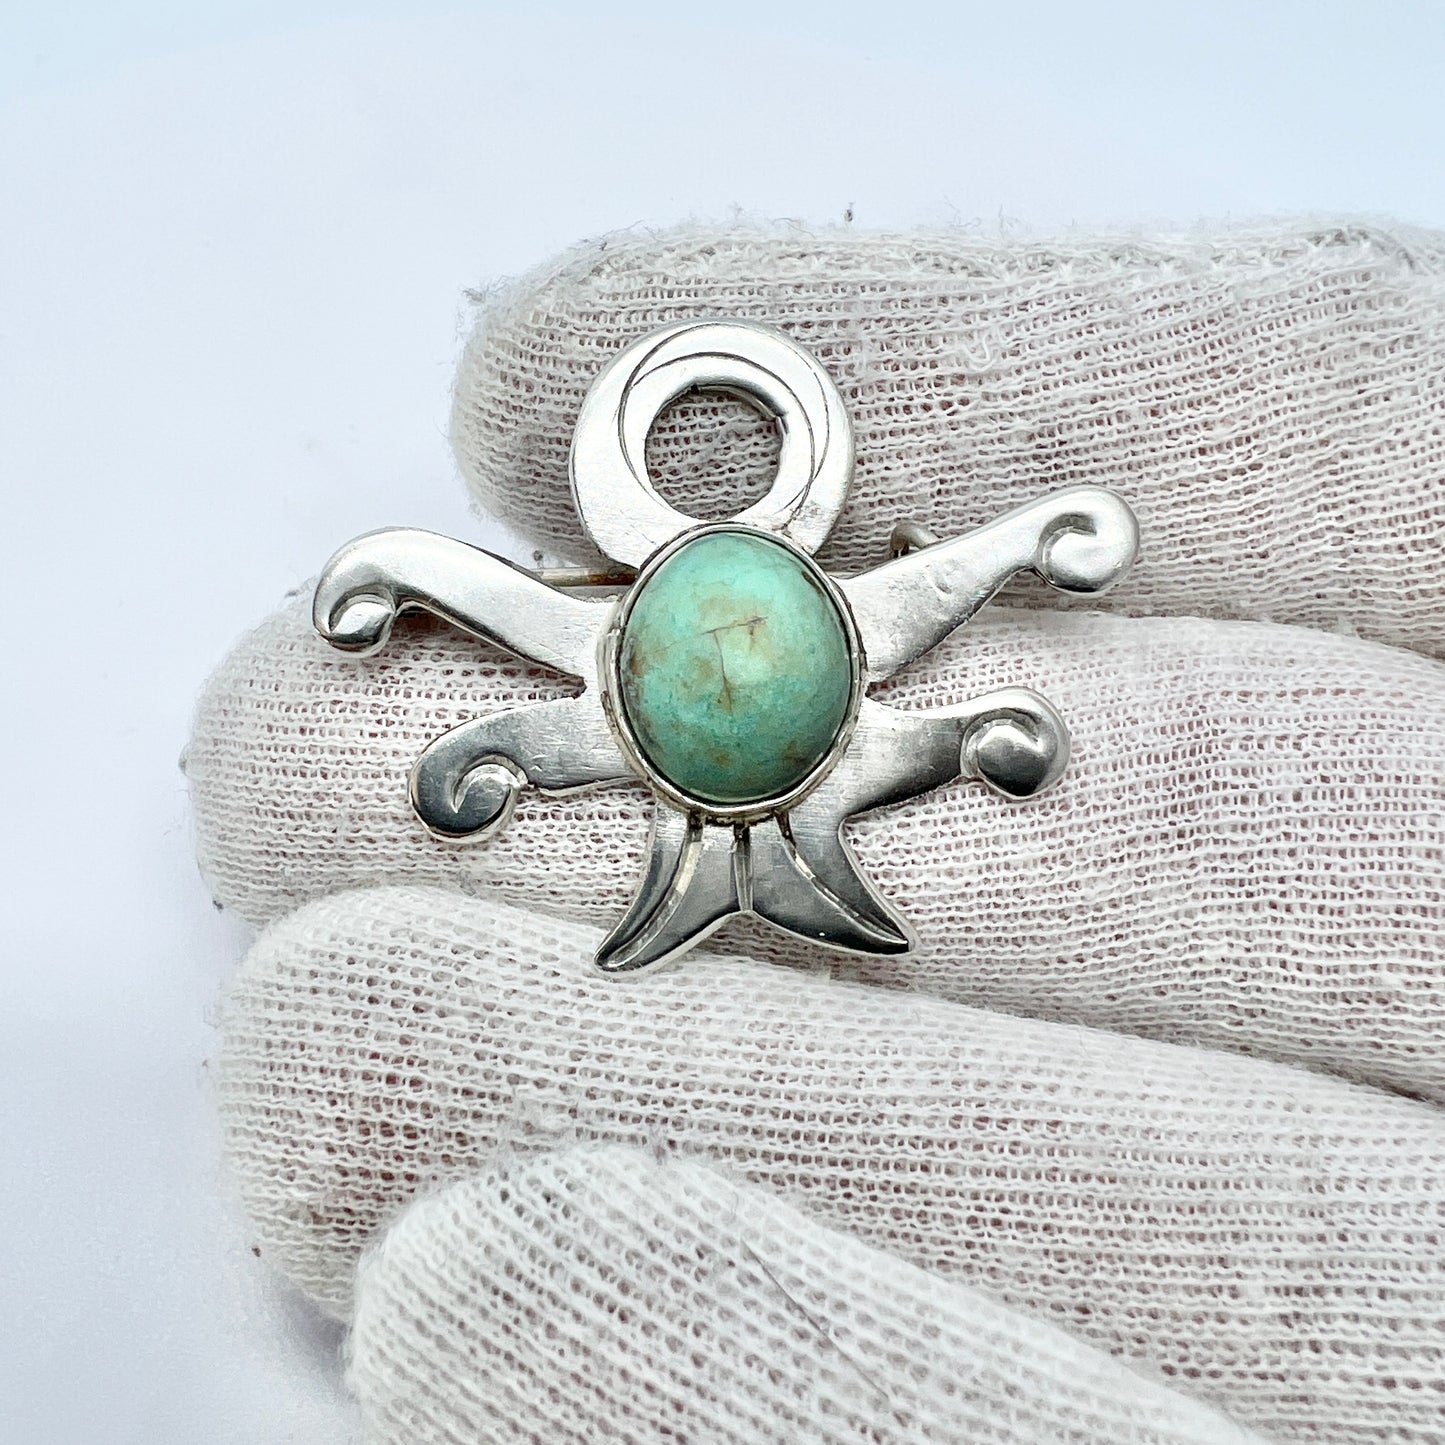 Taxco, Mexico. Vintage 1940s Sterling 980 Silver Turquoise Brooch. Maker's Mark.